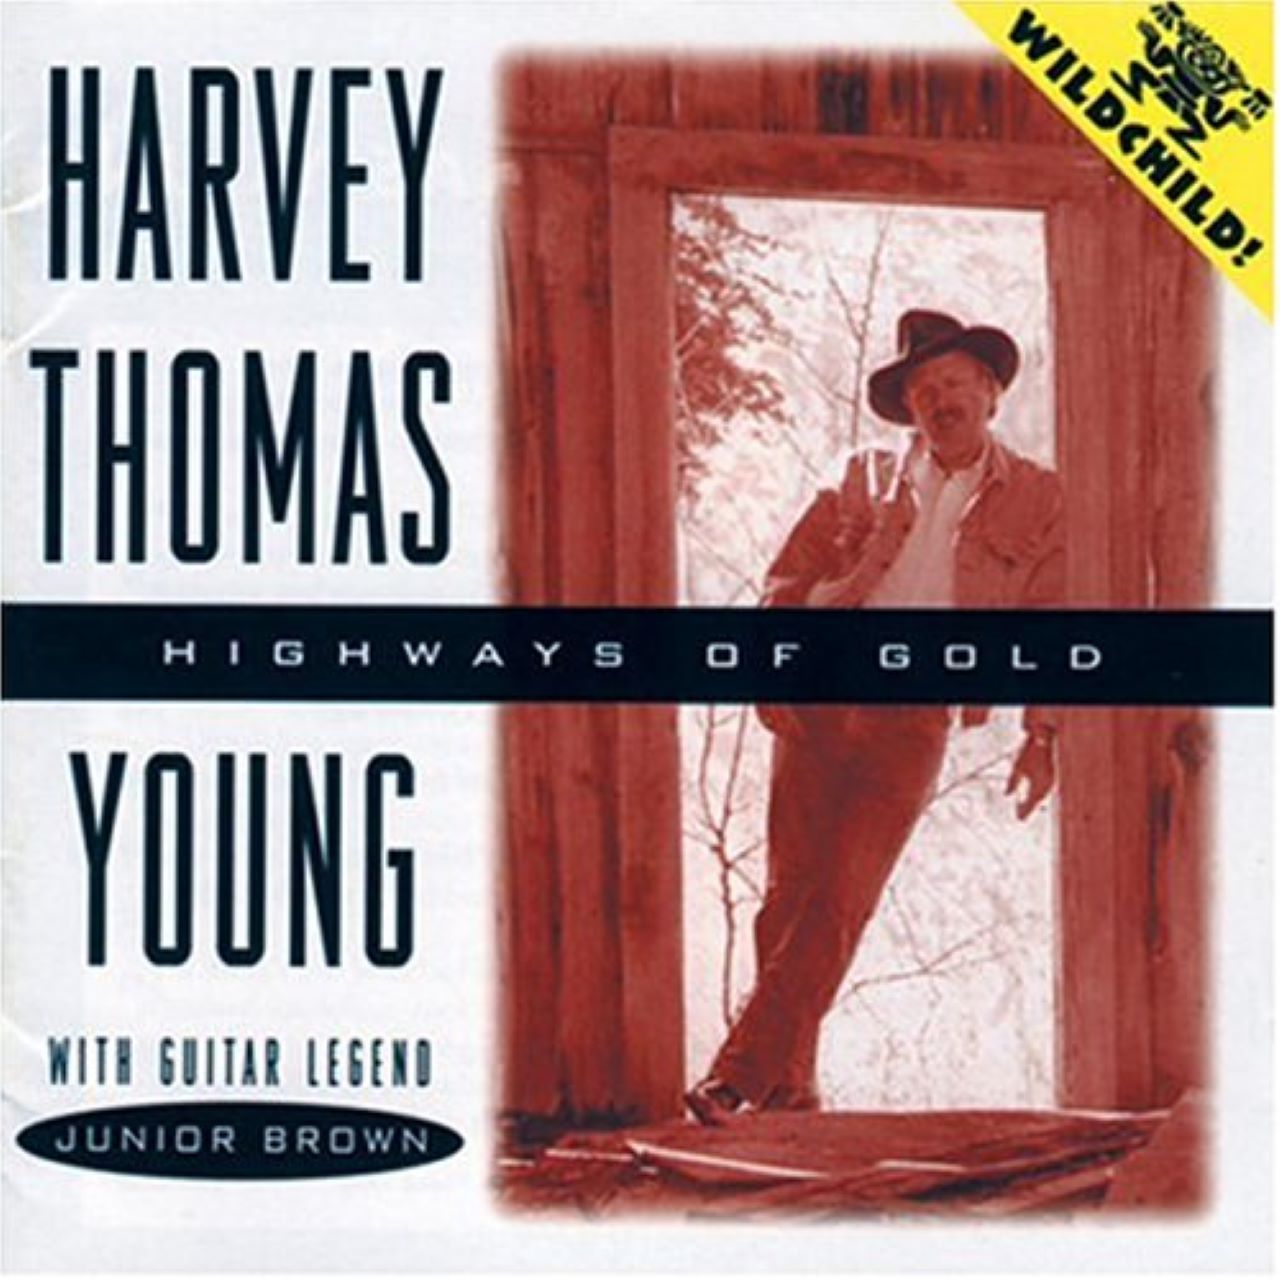 Harvey Thomas Young - Highways Of Gold cover album